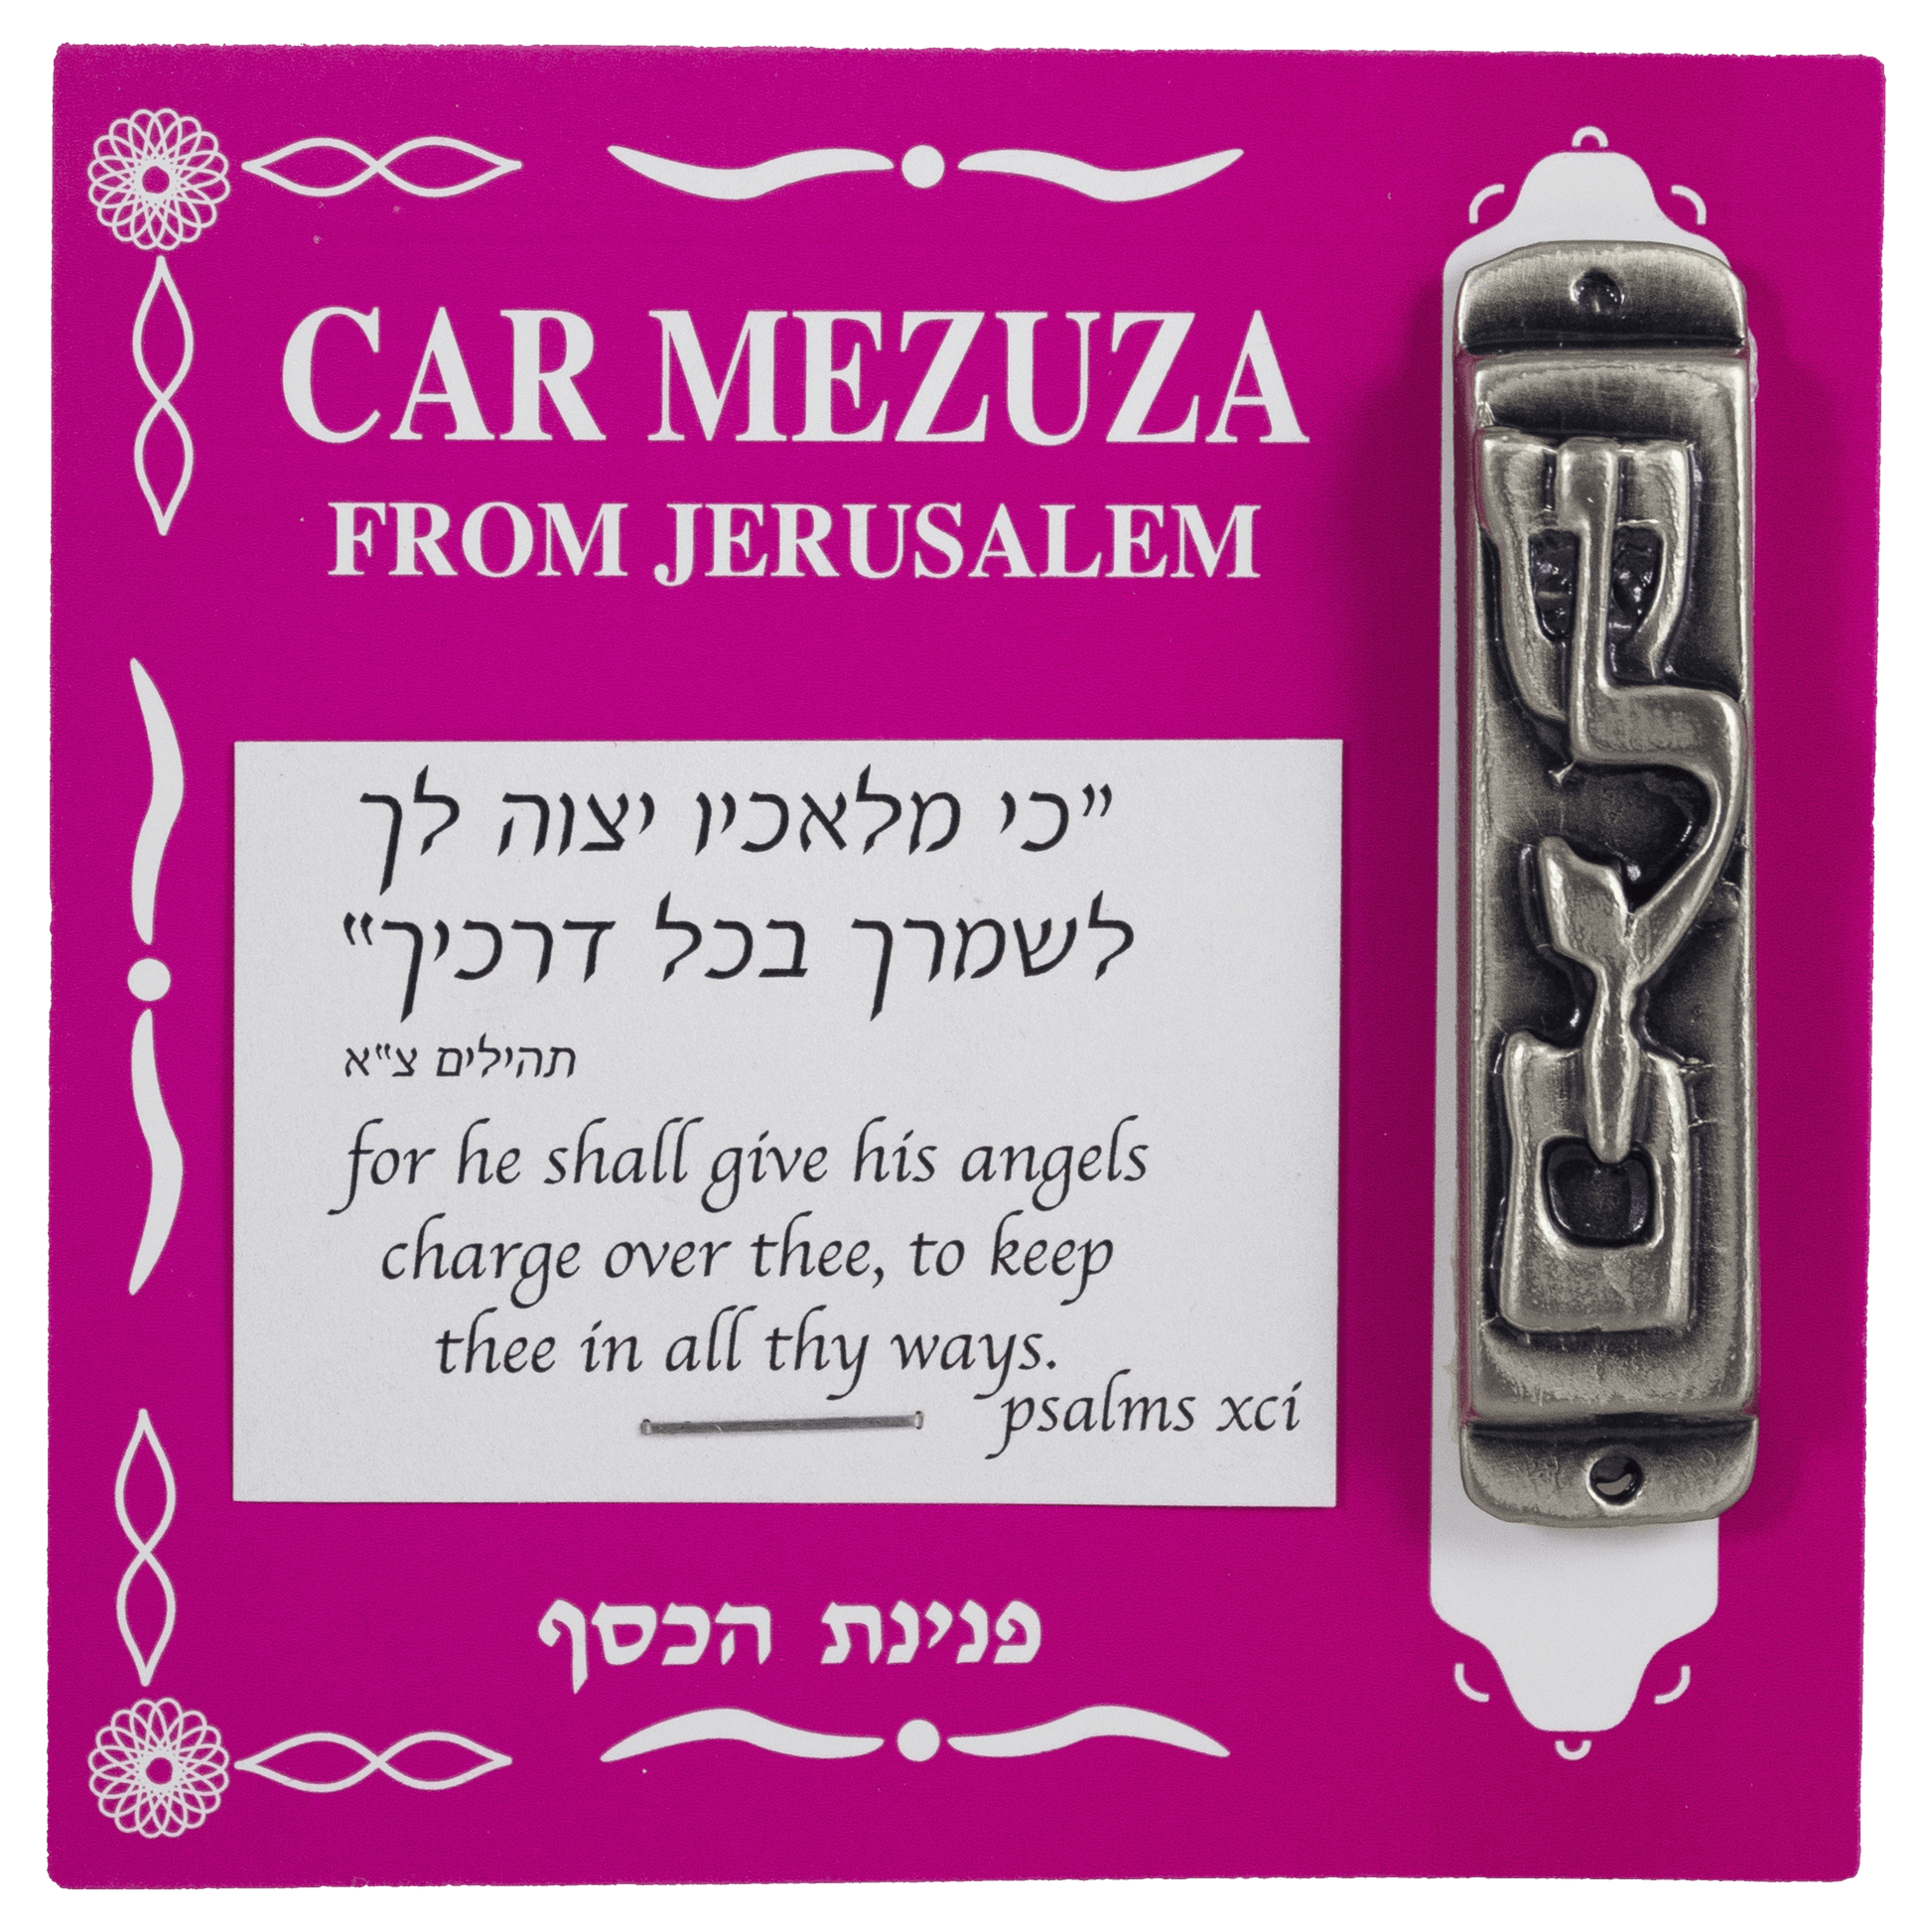 Compact Mezuzah to put in your car. It read "Shalom" and is the color muted silver